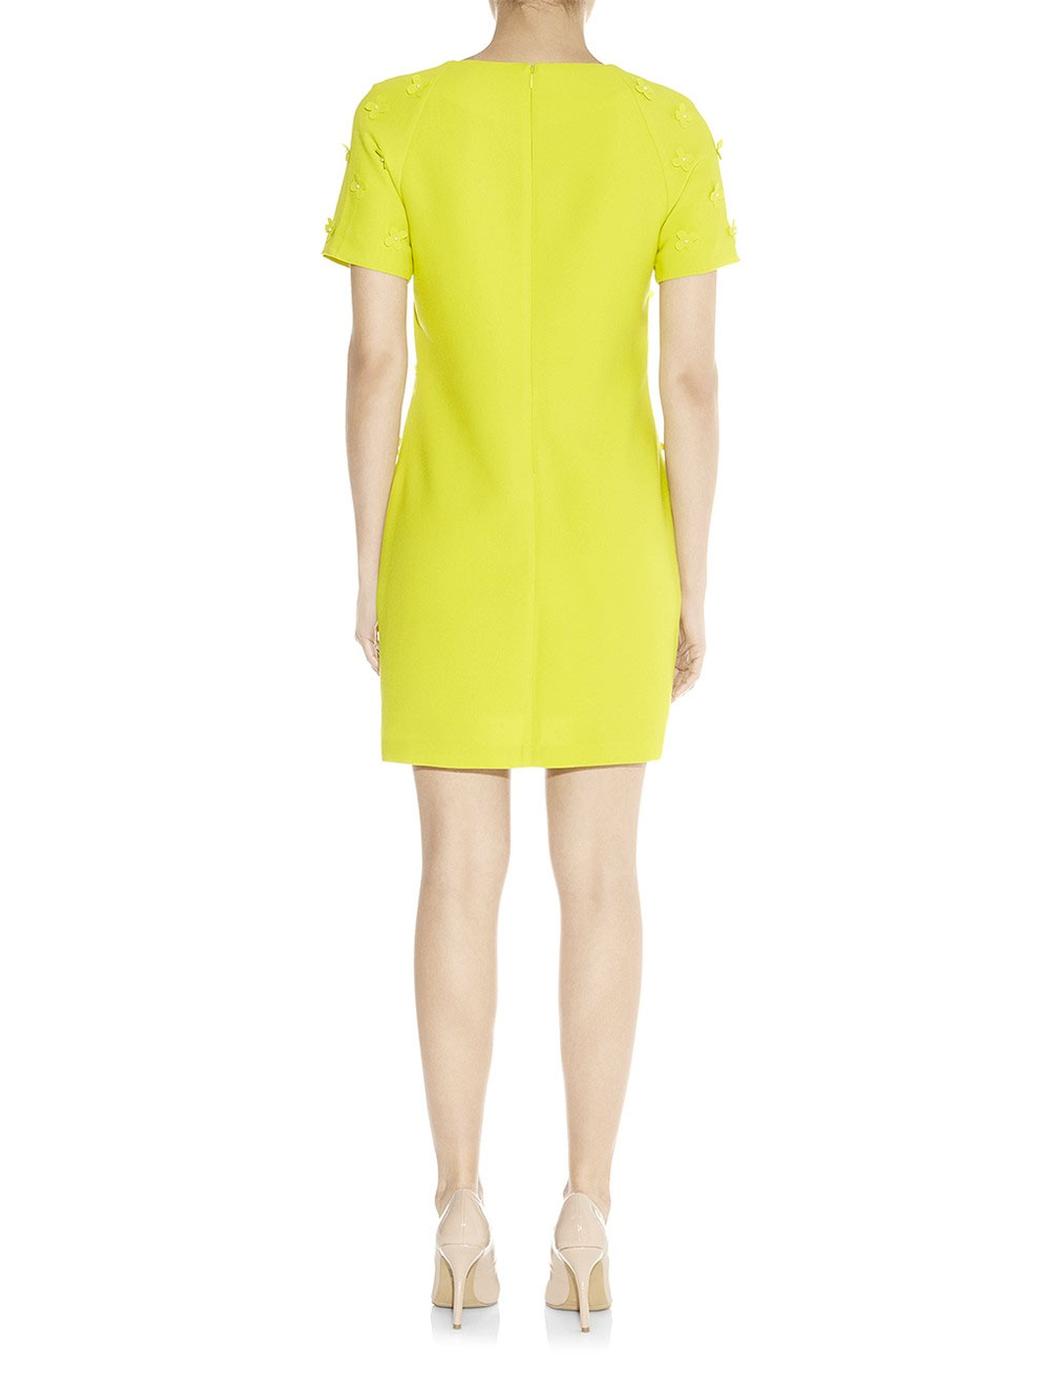 Darling Darcy Retro Vintage inspired Tunic Dress in Lime